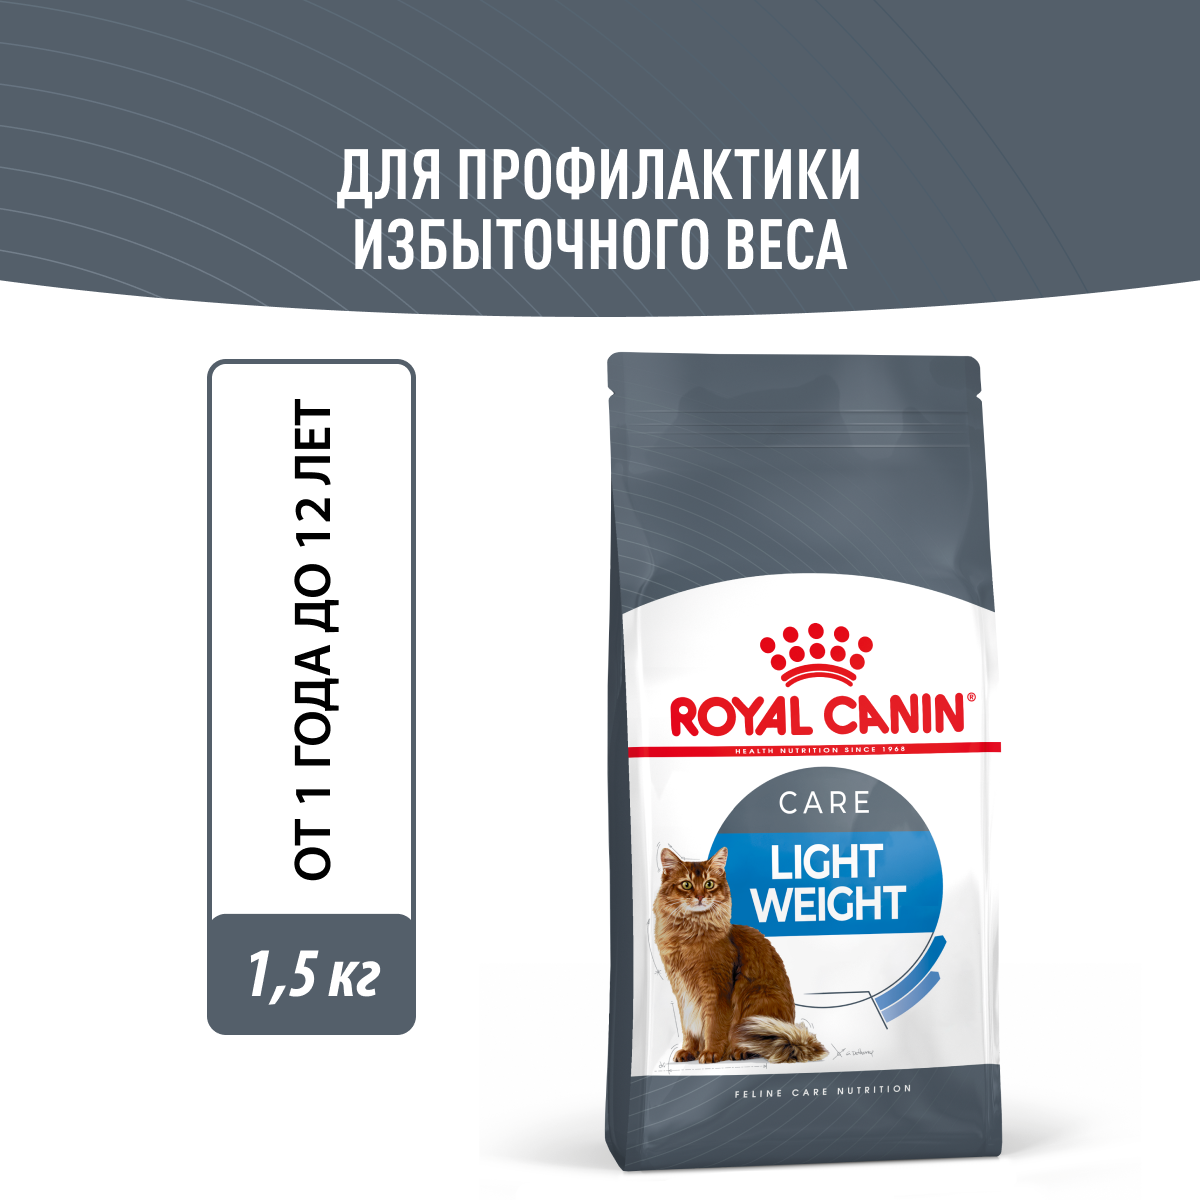           Royal Canin Light Weight Care, 1,5 